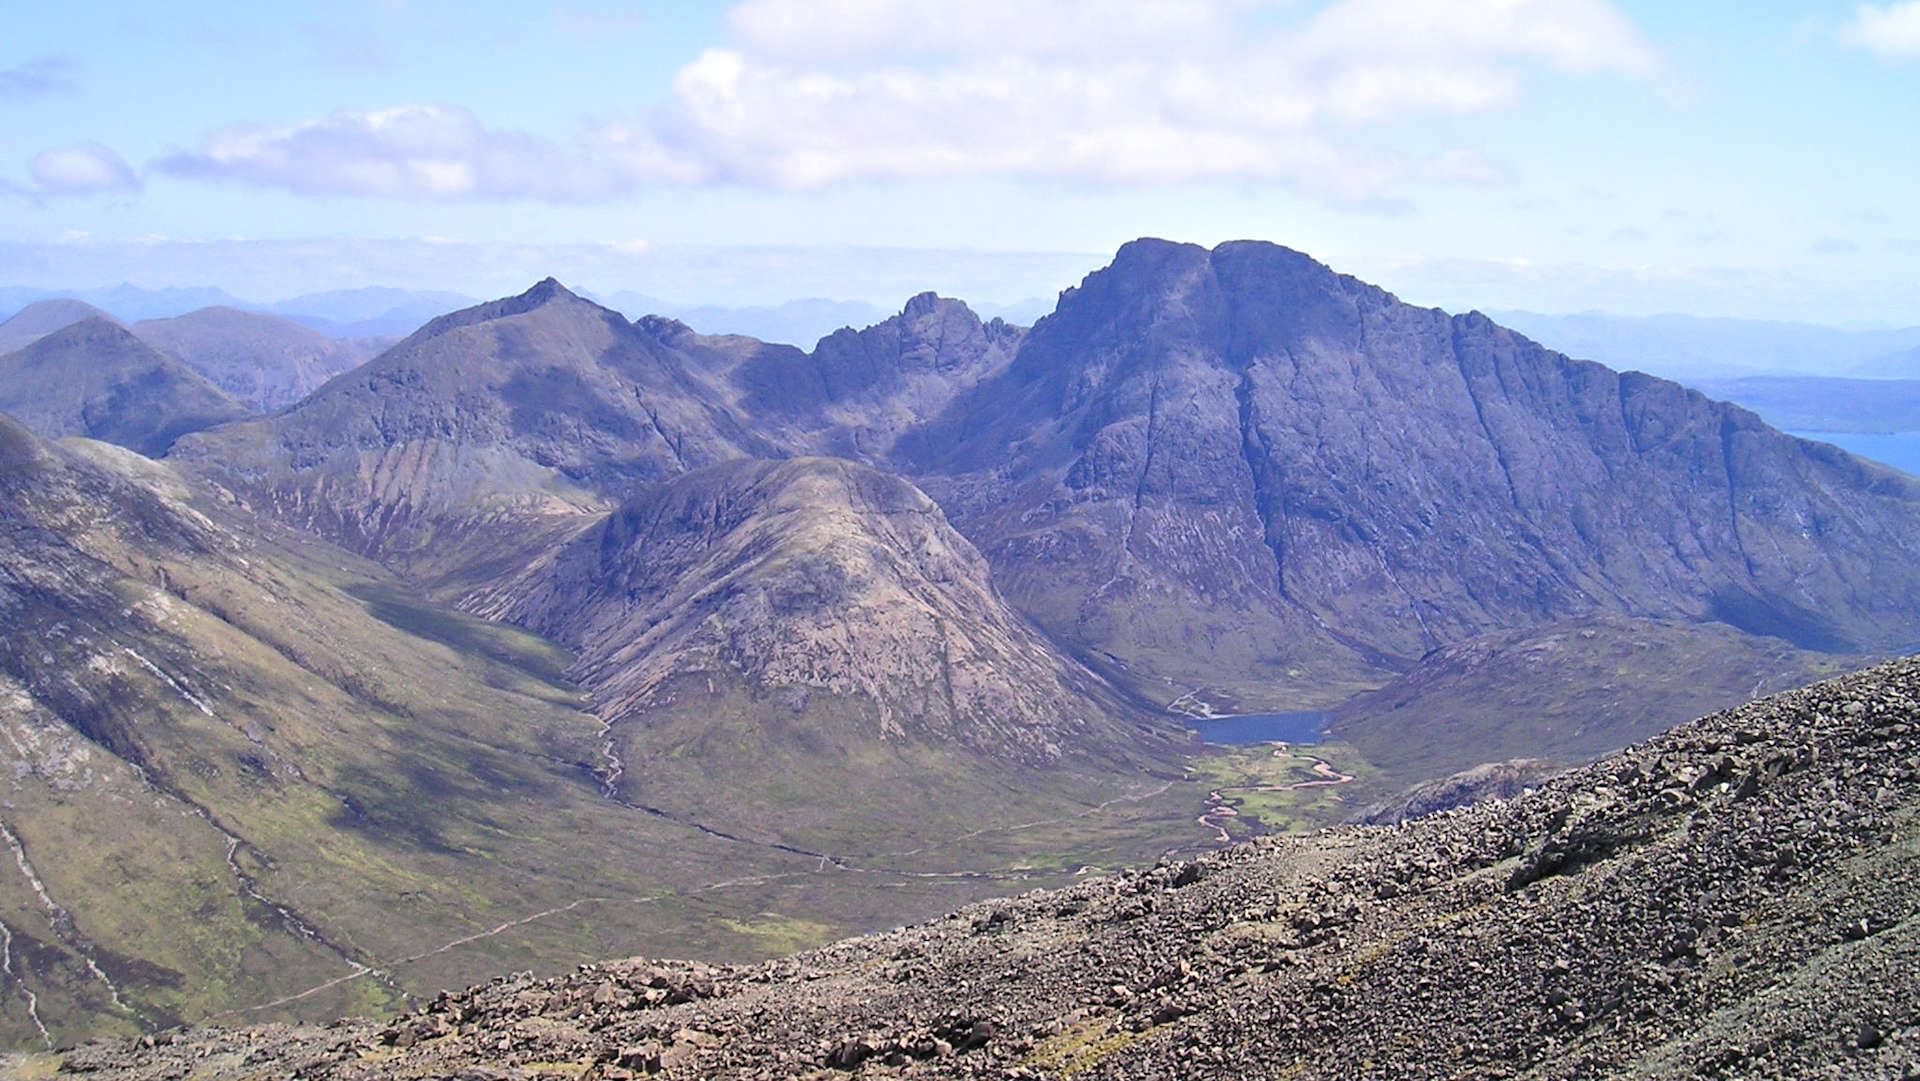 Blaven from the Cuillin